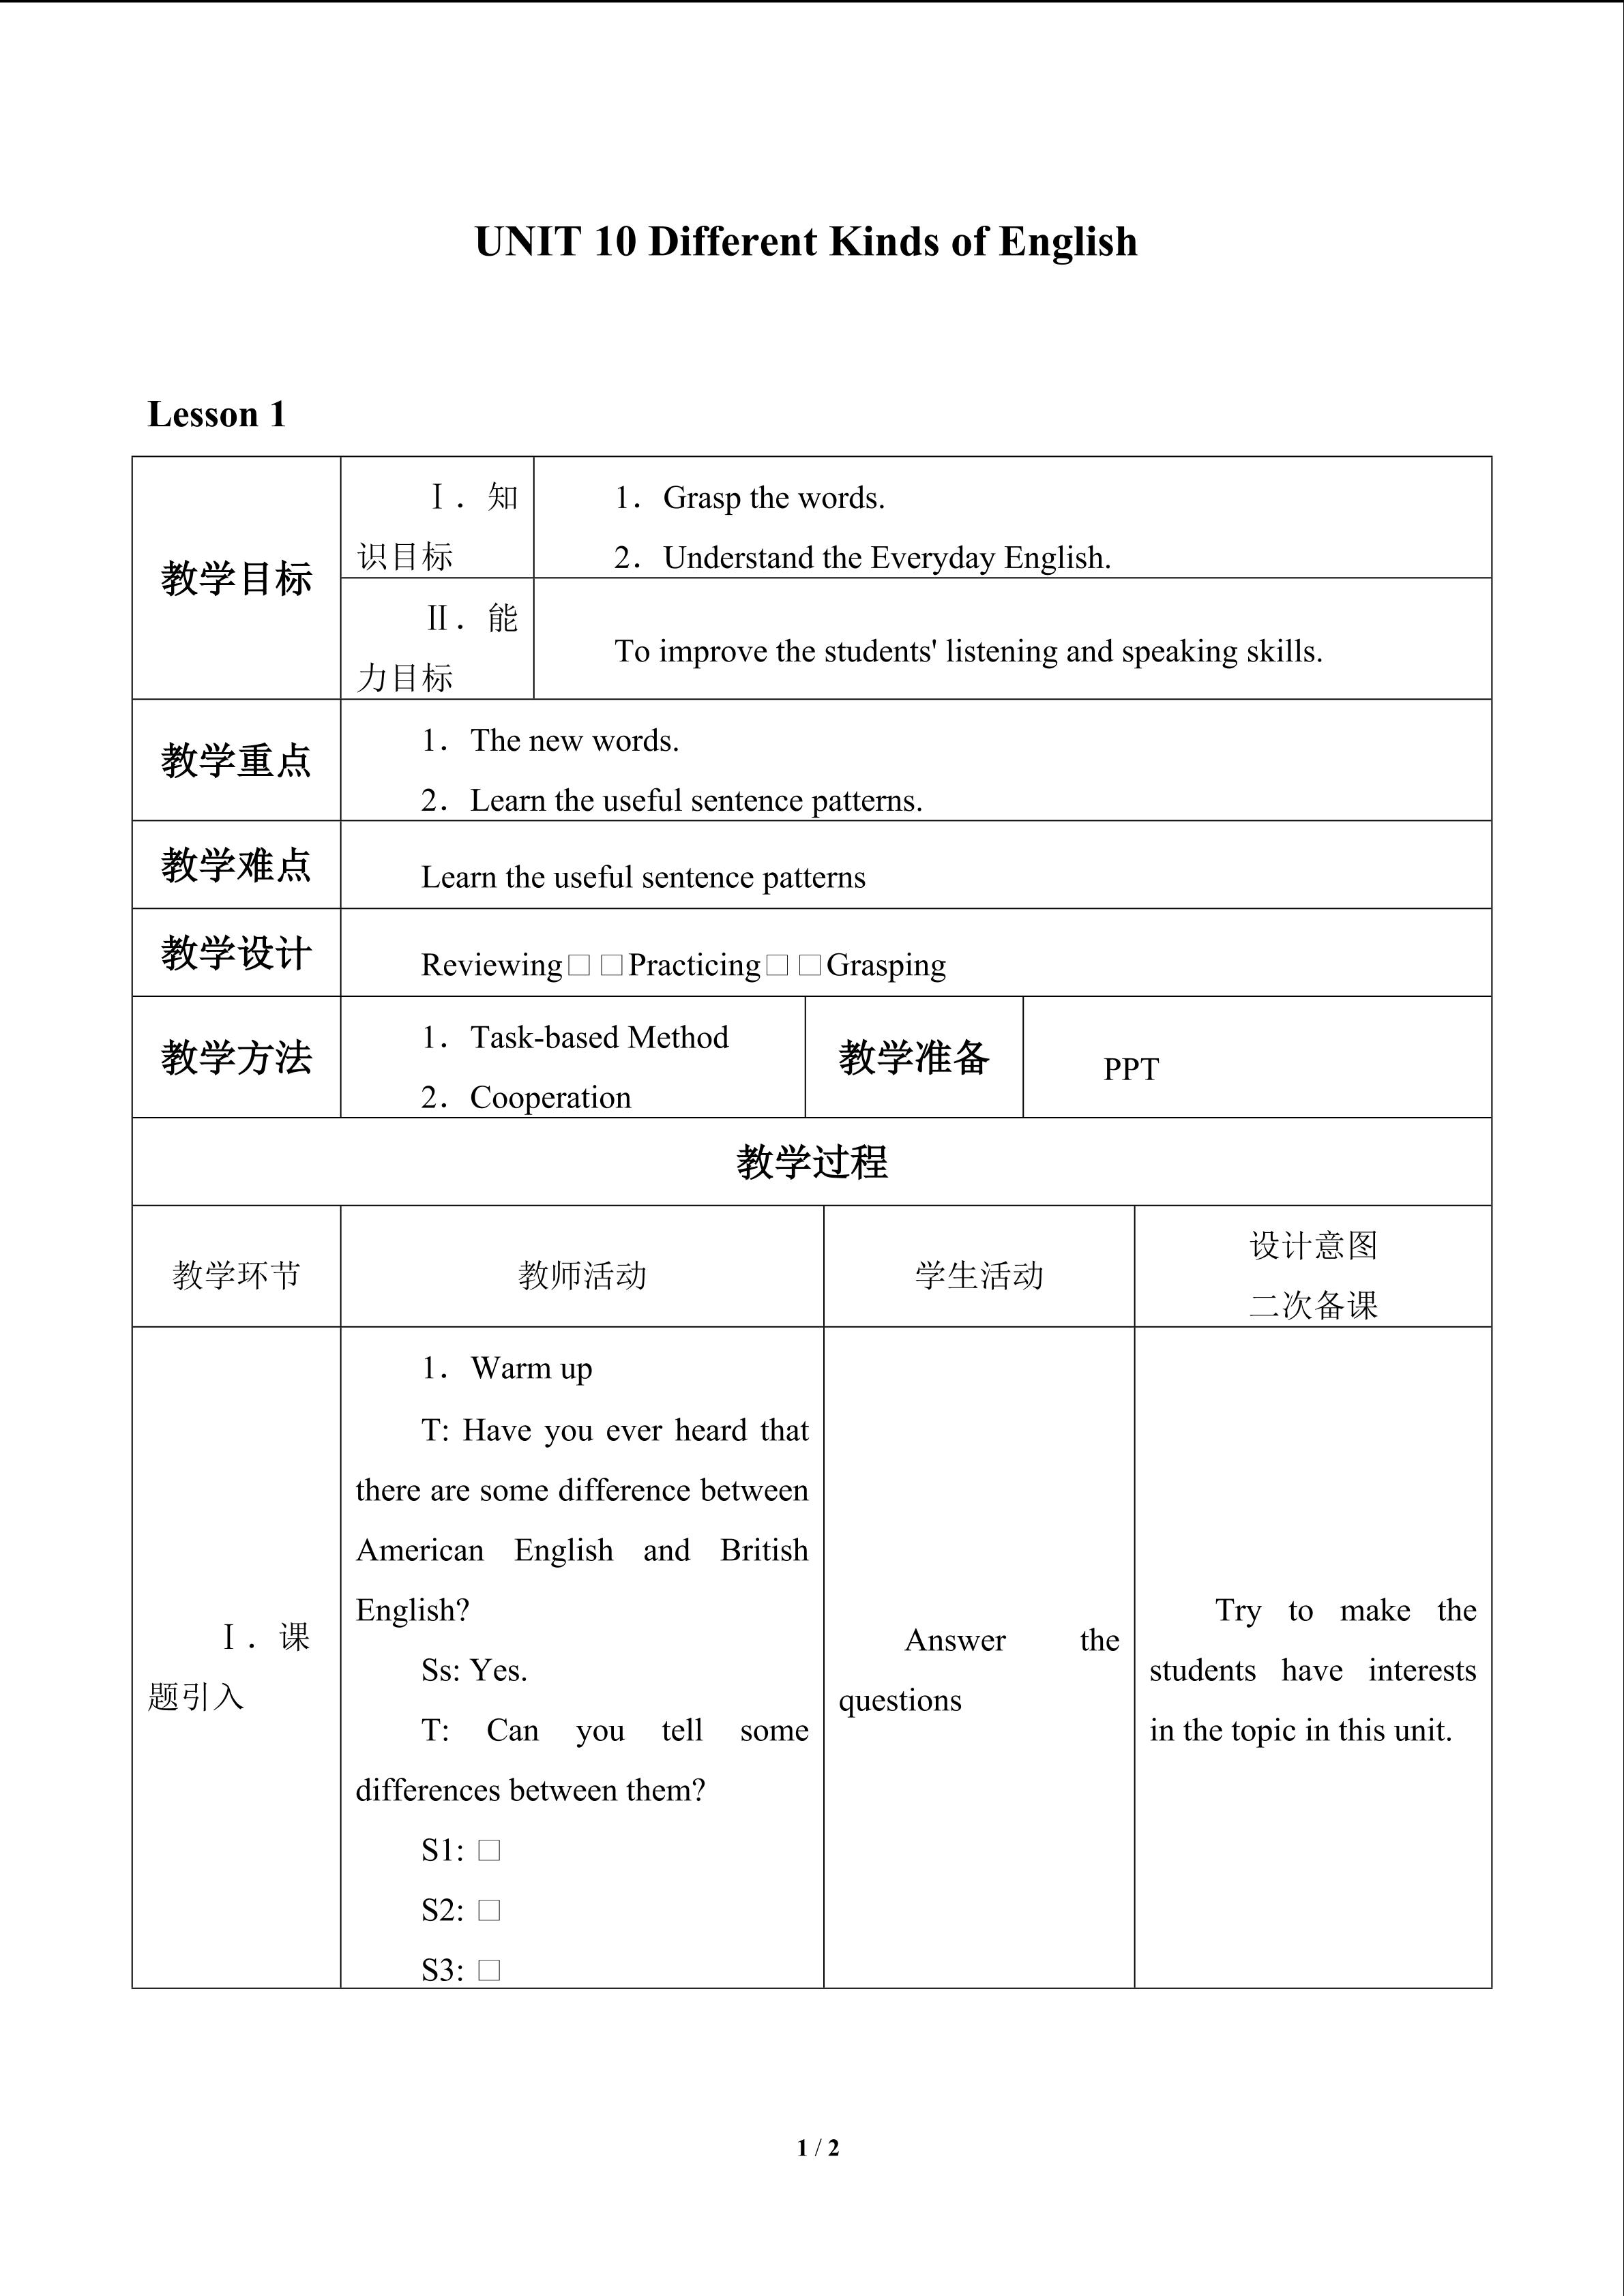 UNIT 10 Different Kinds of English_教案1